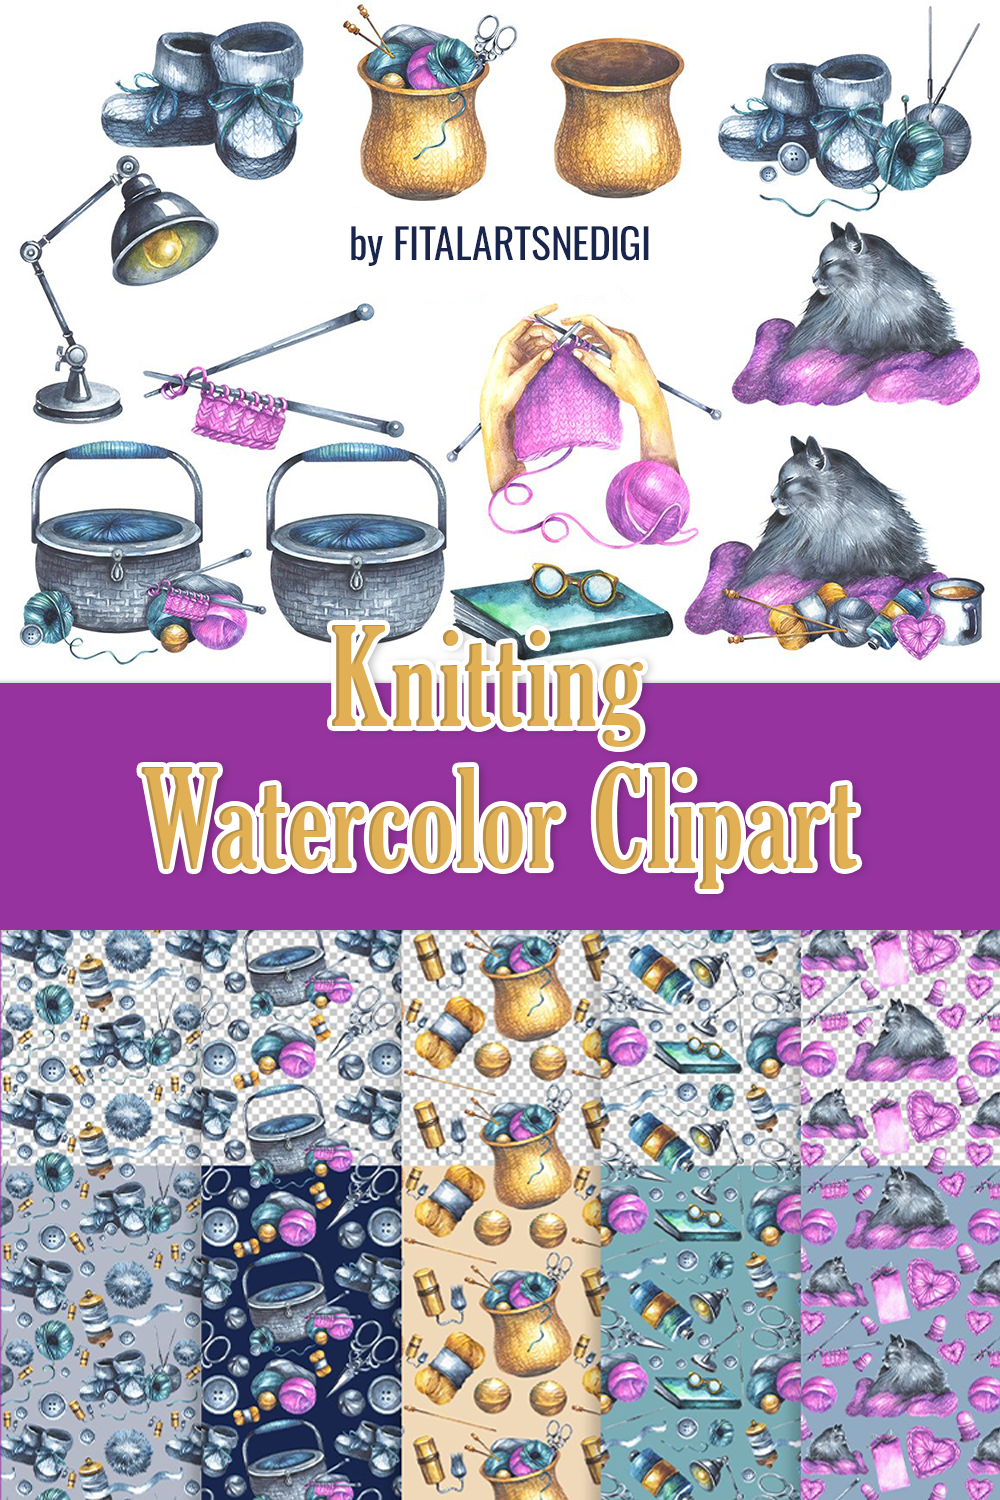 Knitting watercolor clipart of pinterest.